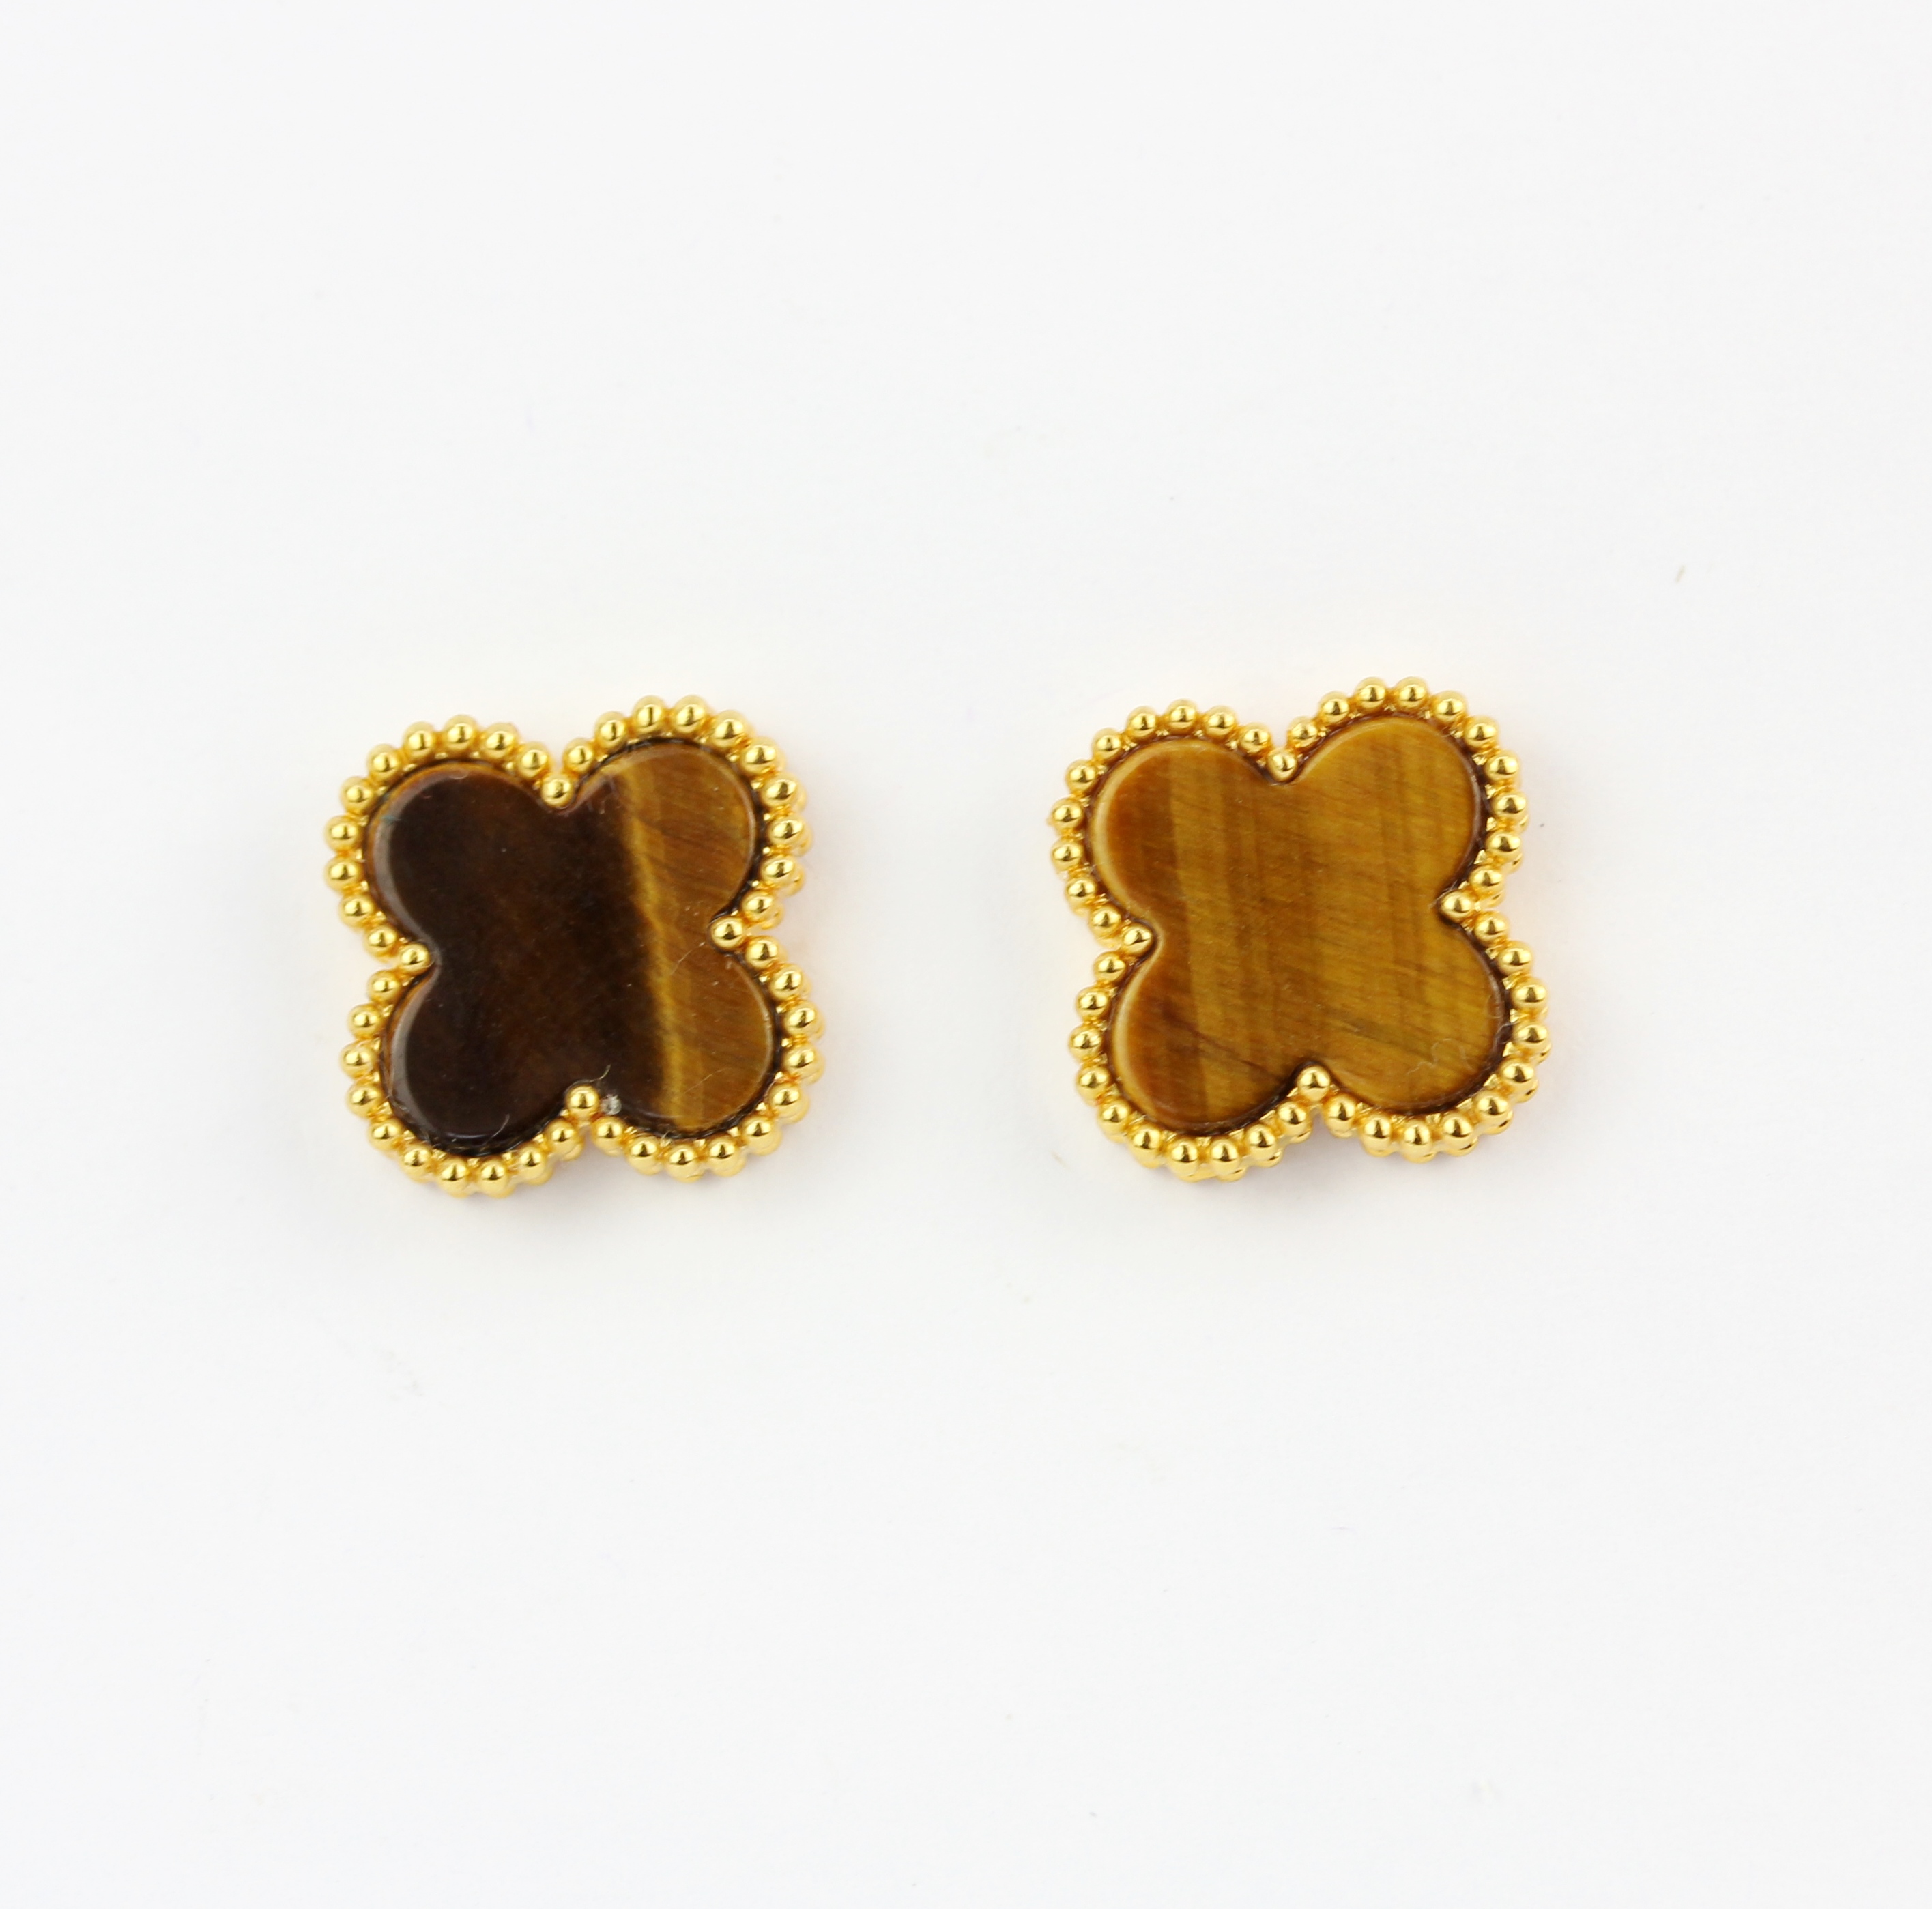 A pair of 18ct yellow gold clover shaped stud earrings set with tiger's eye, 1.5cm. - Image 2 of 2